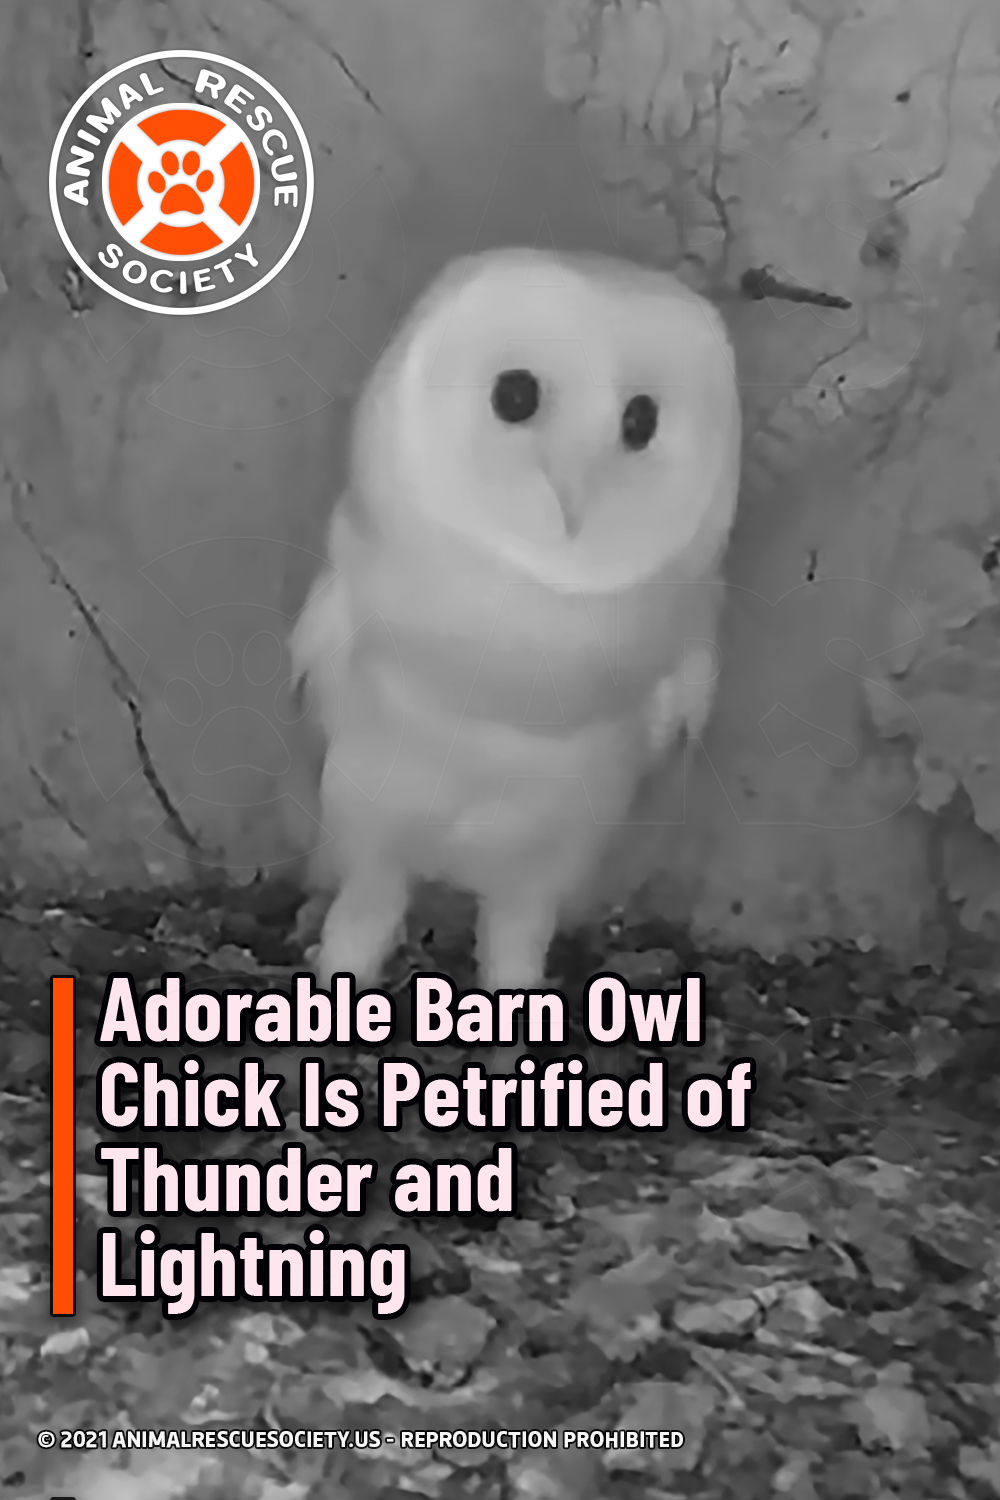 Adorable Barn Owl Chick Is Petrified of Thunder and Lightning